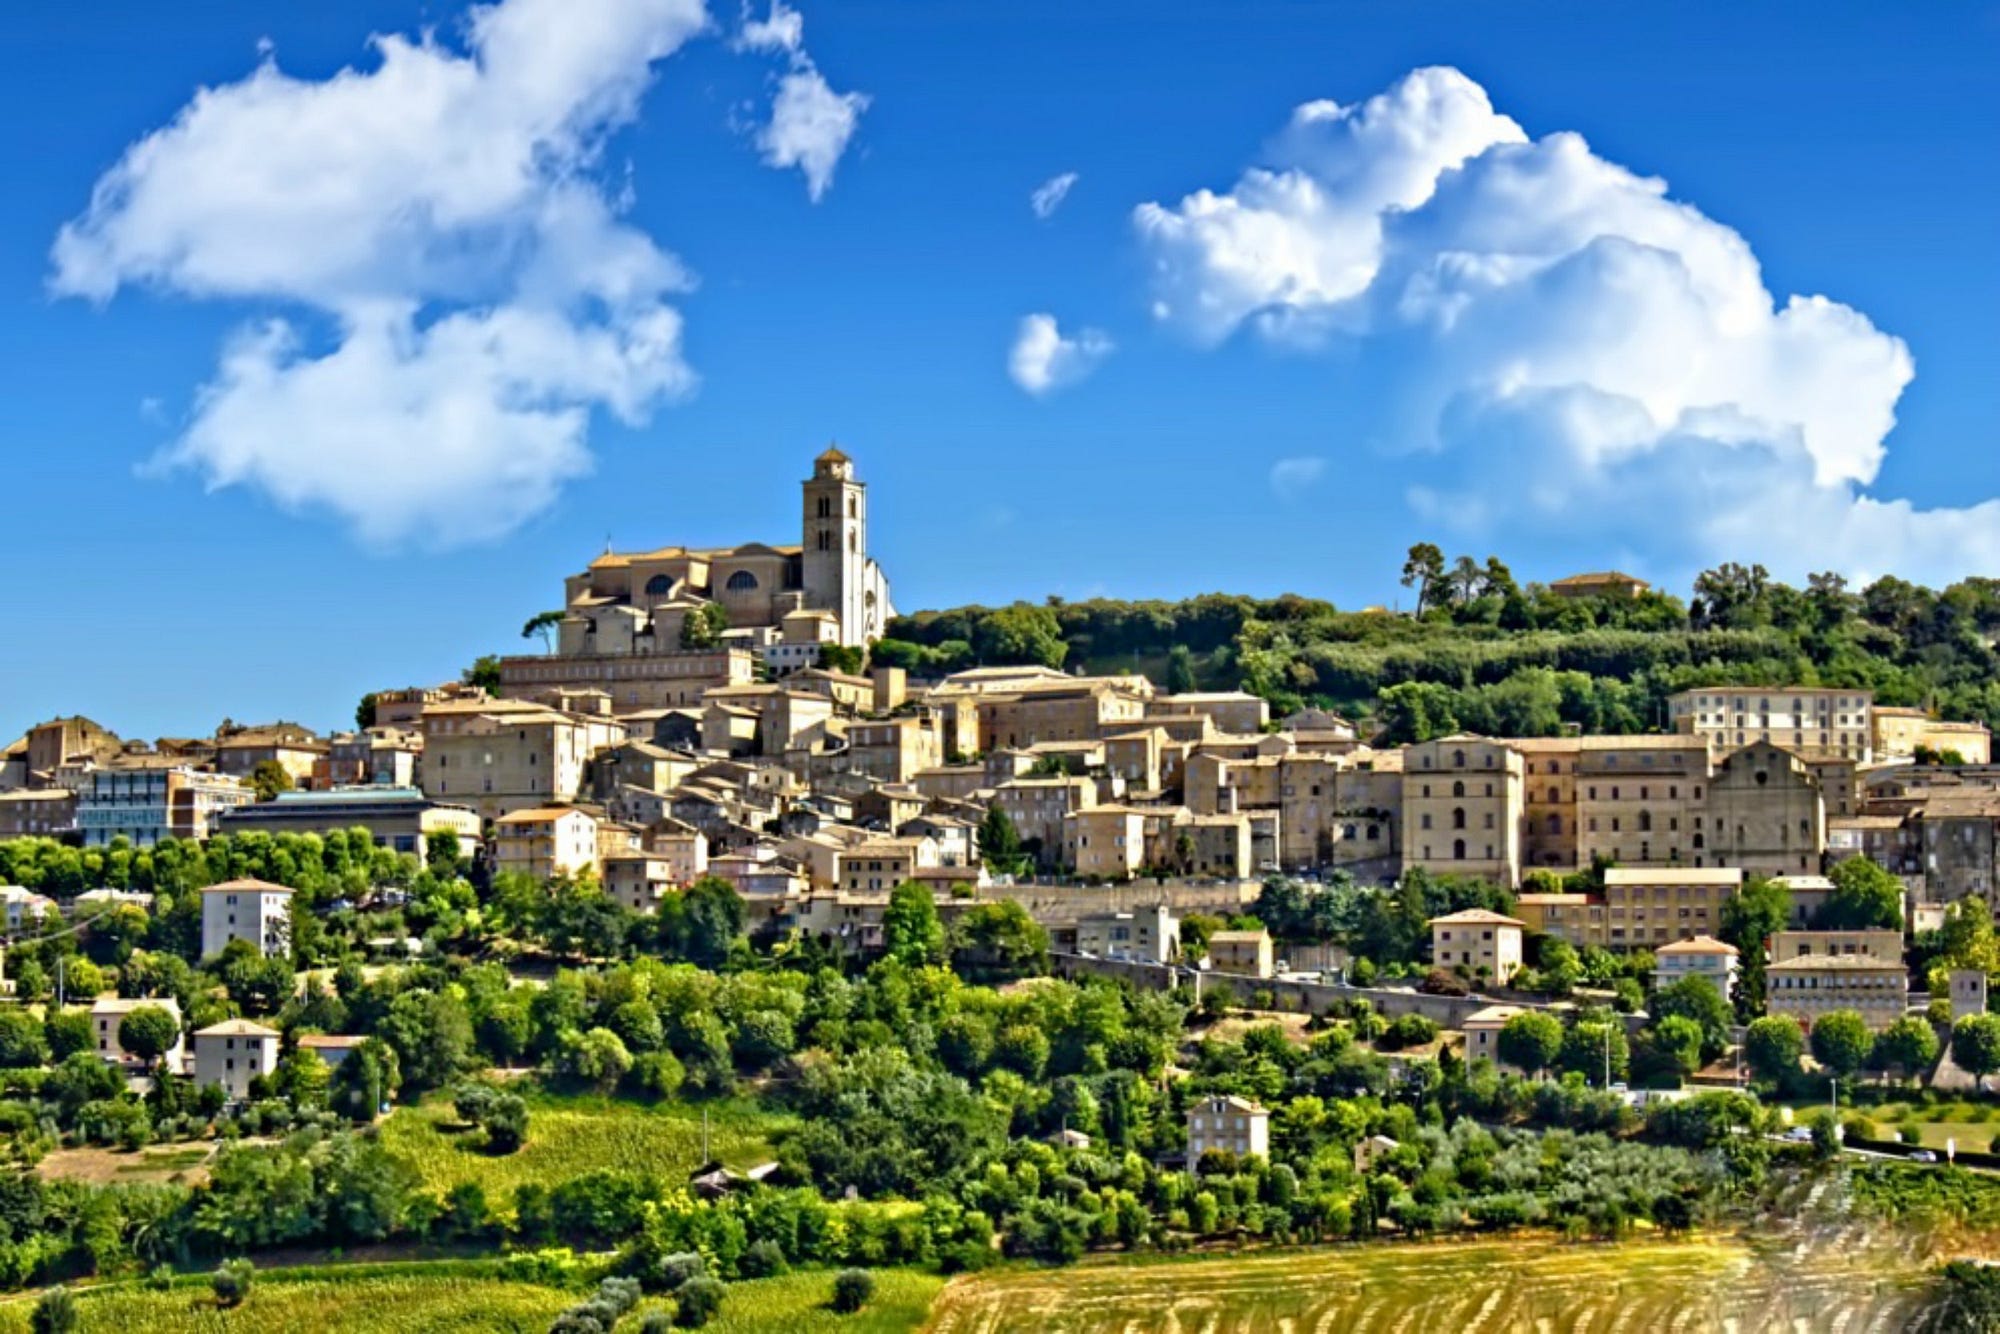 Le Marche inside the “Italy 2016: Best of Italy Tourism” by Tripadvisor